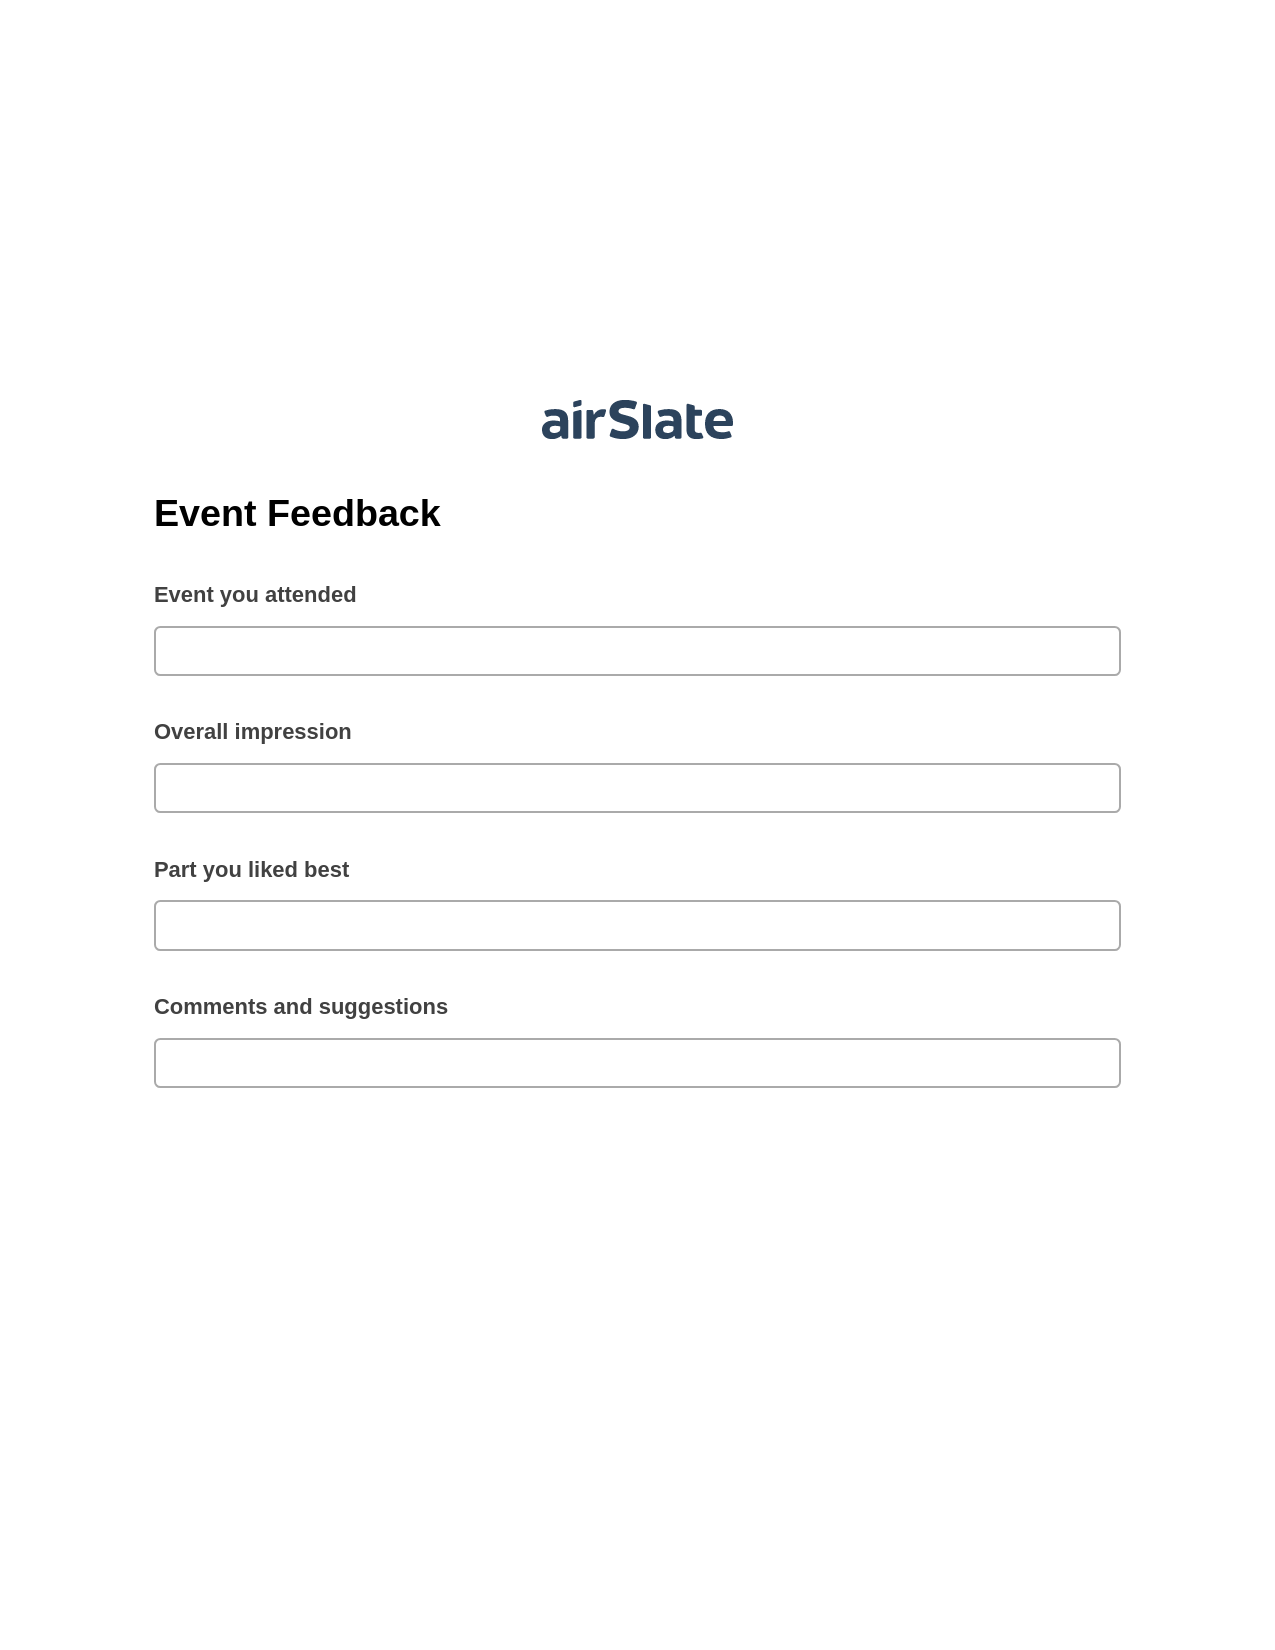 Event Feedback Pre-fill from another Slate Bot, Reminder Bot, Post-finish Document Bot